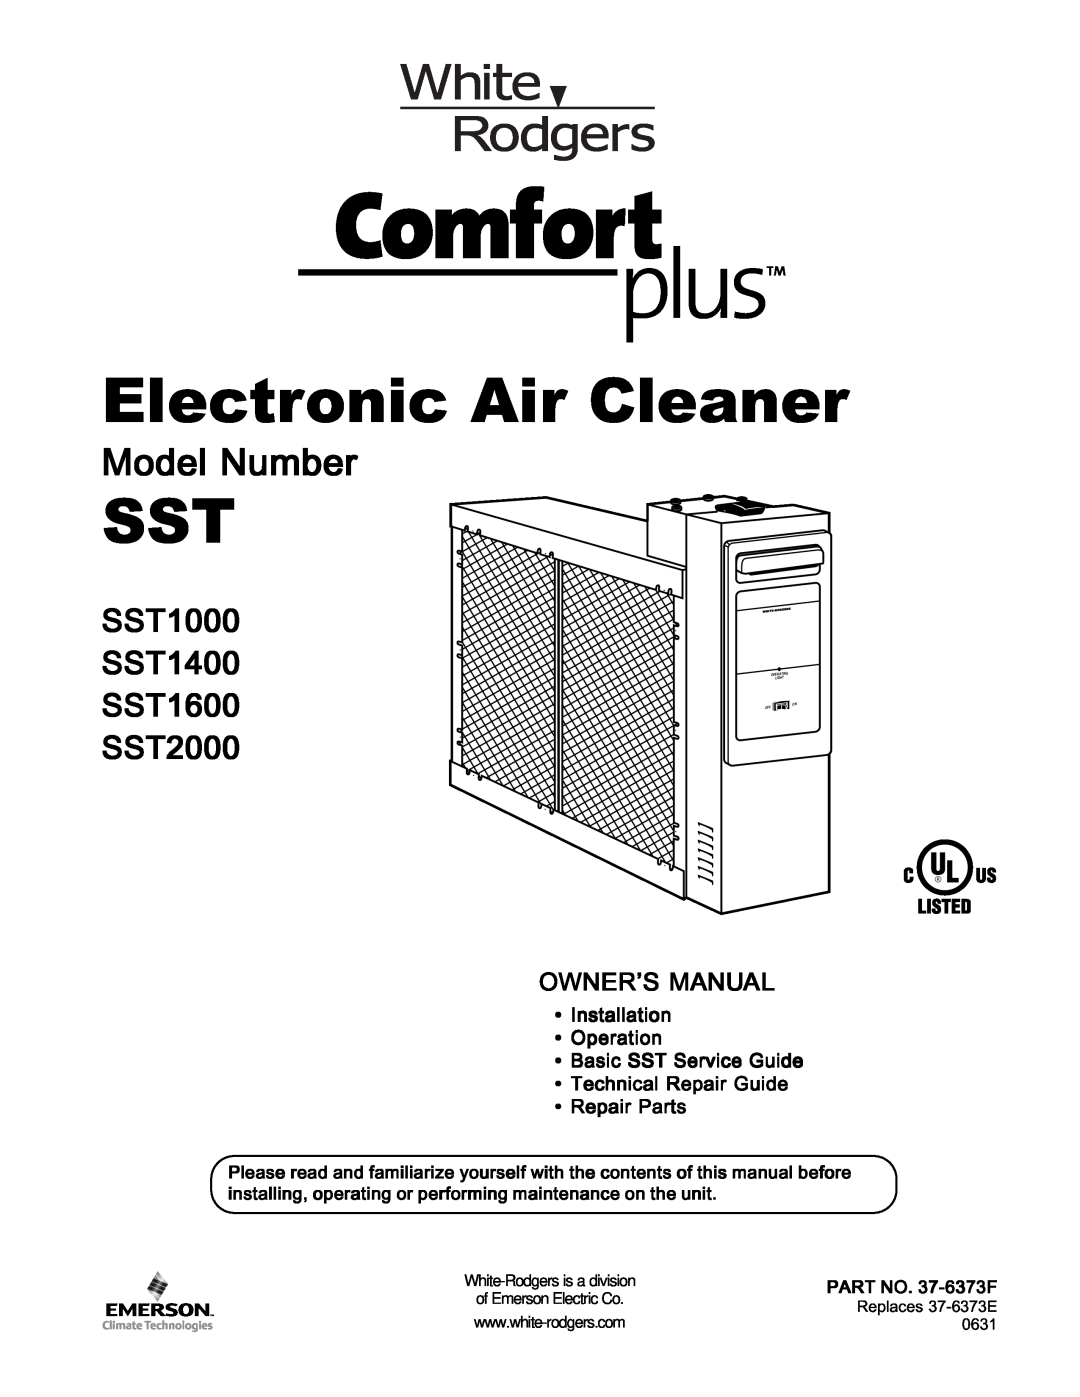 Emerson manual SST1000 SST1400 SST1600 SST2000, Installation Operation Basic SST Service Guide, Electronic Air Cleaner 